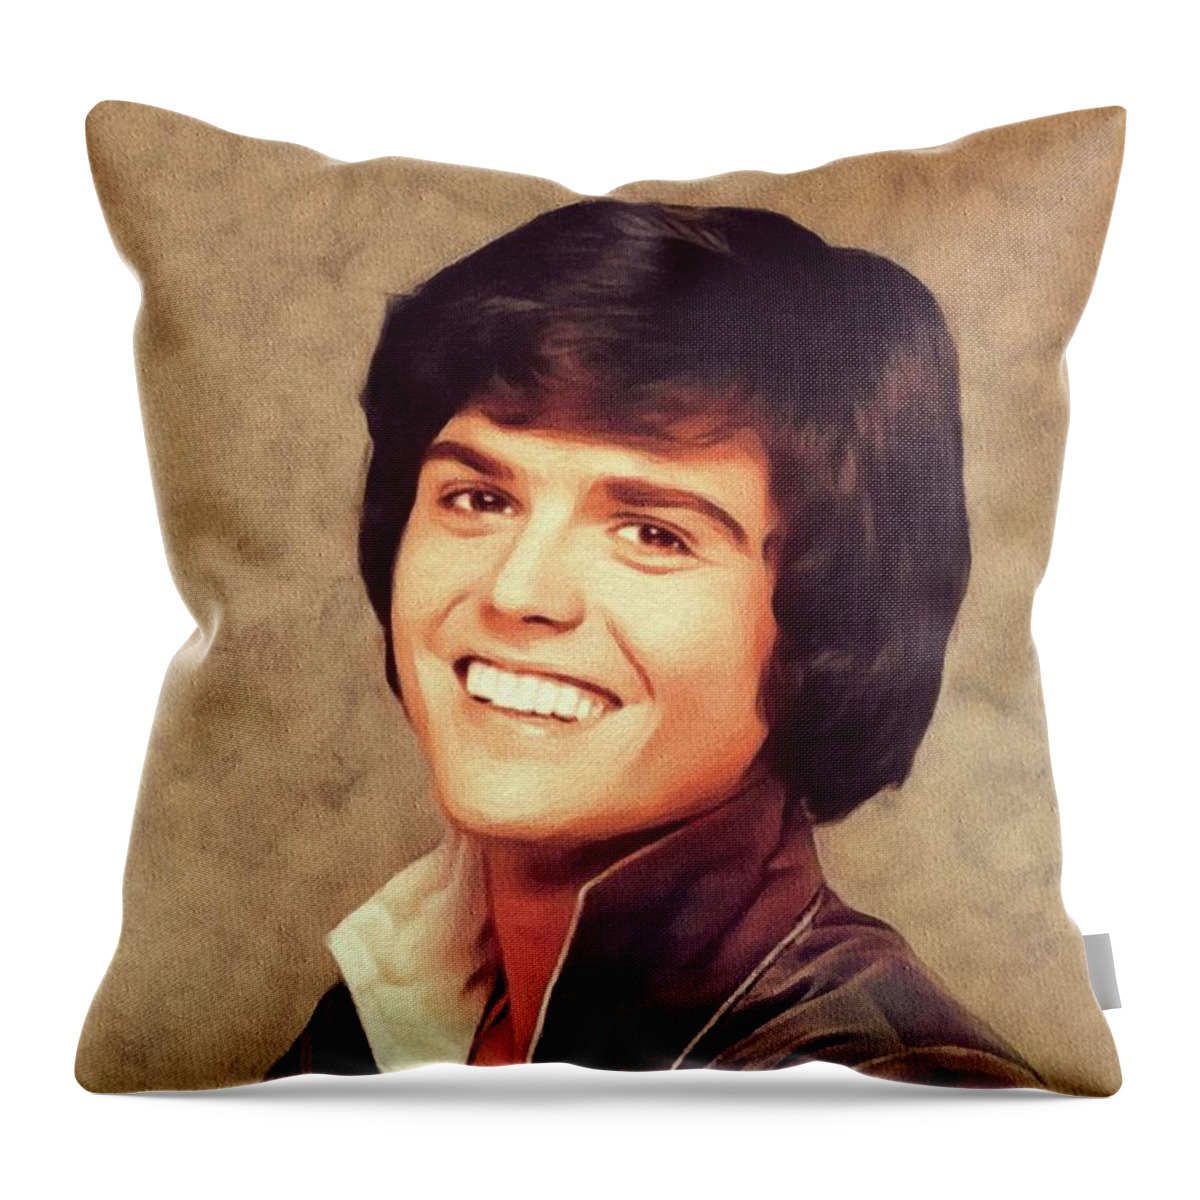 Donny Throw Pillow featuring the painting Donny Osmond, Singer/Actor #1 by Esoterica Art Agency